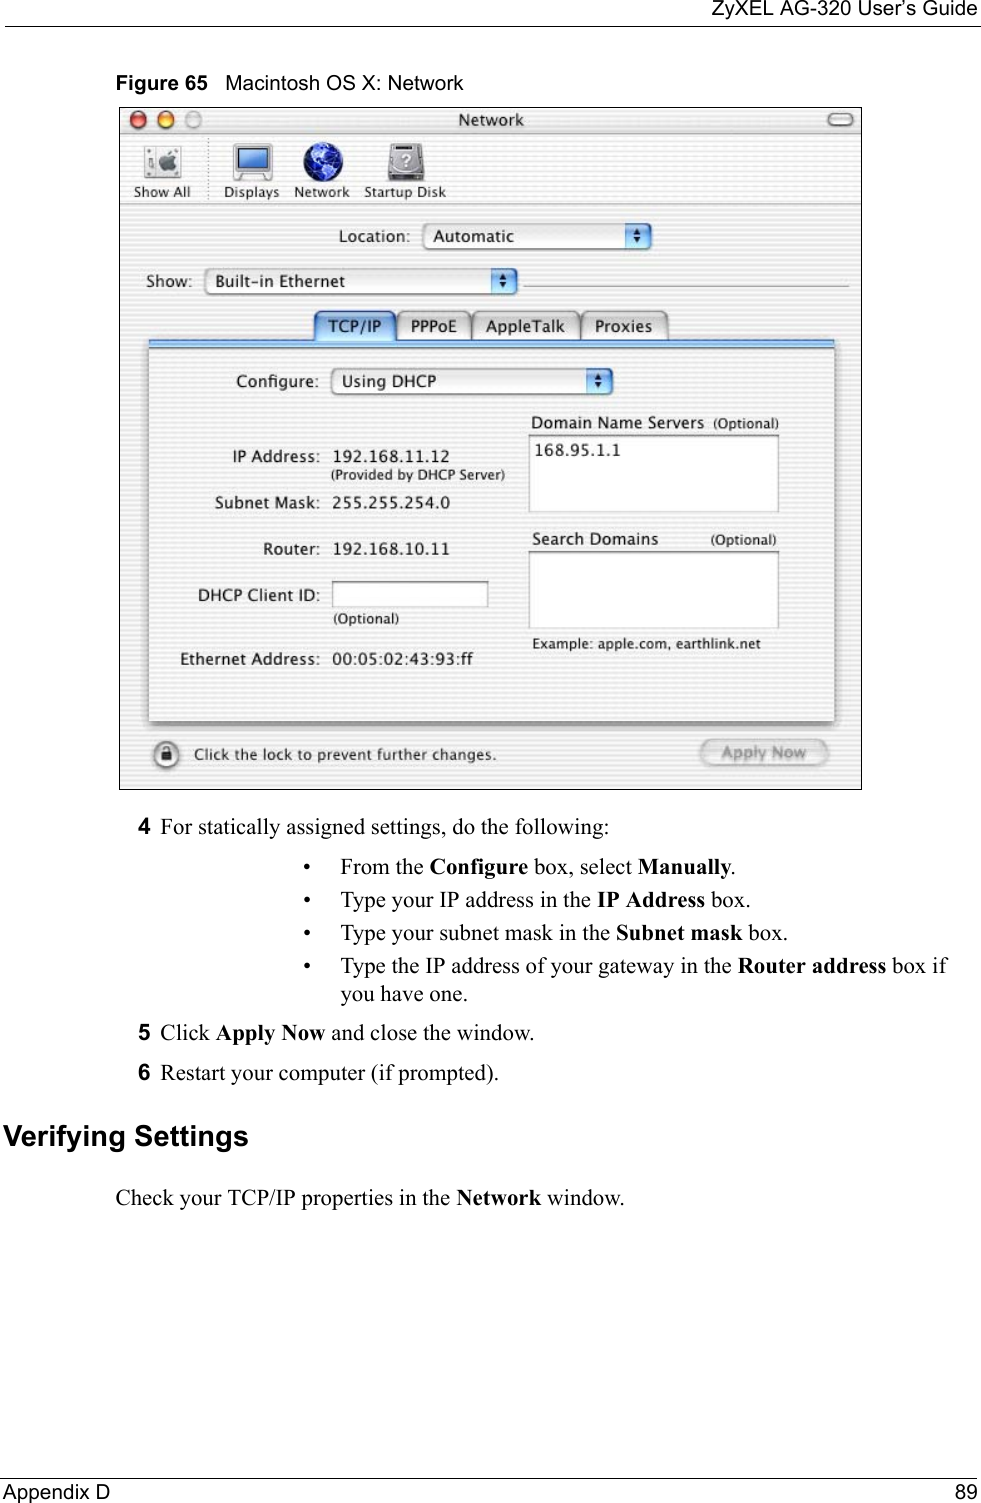 ZyXEL AG-320 User’s GuideAppendix D 89Figure 65   Macintosh OS X: Network4For statically assigned settings, do the following:•From the Configure box, select Manually.• Type your IP address in the IP Address box.• Type your subnet mask in the Subnet mask box.• Type the IP address of your gateway in the Router address box if you have one.5Click Apply Now and close the window.6Restart your computer (if prompted).Verifying SettingsCheck your TCP/IP properties in the Network window.